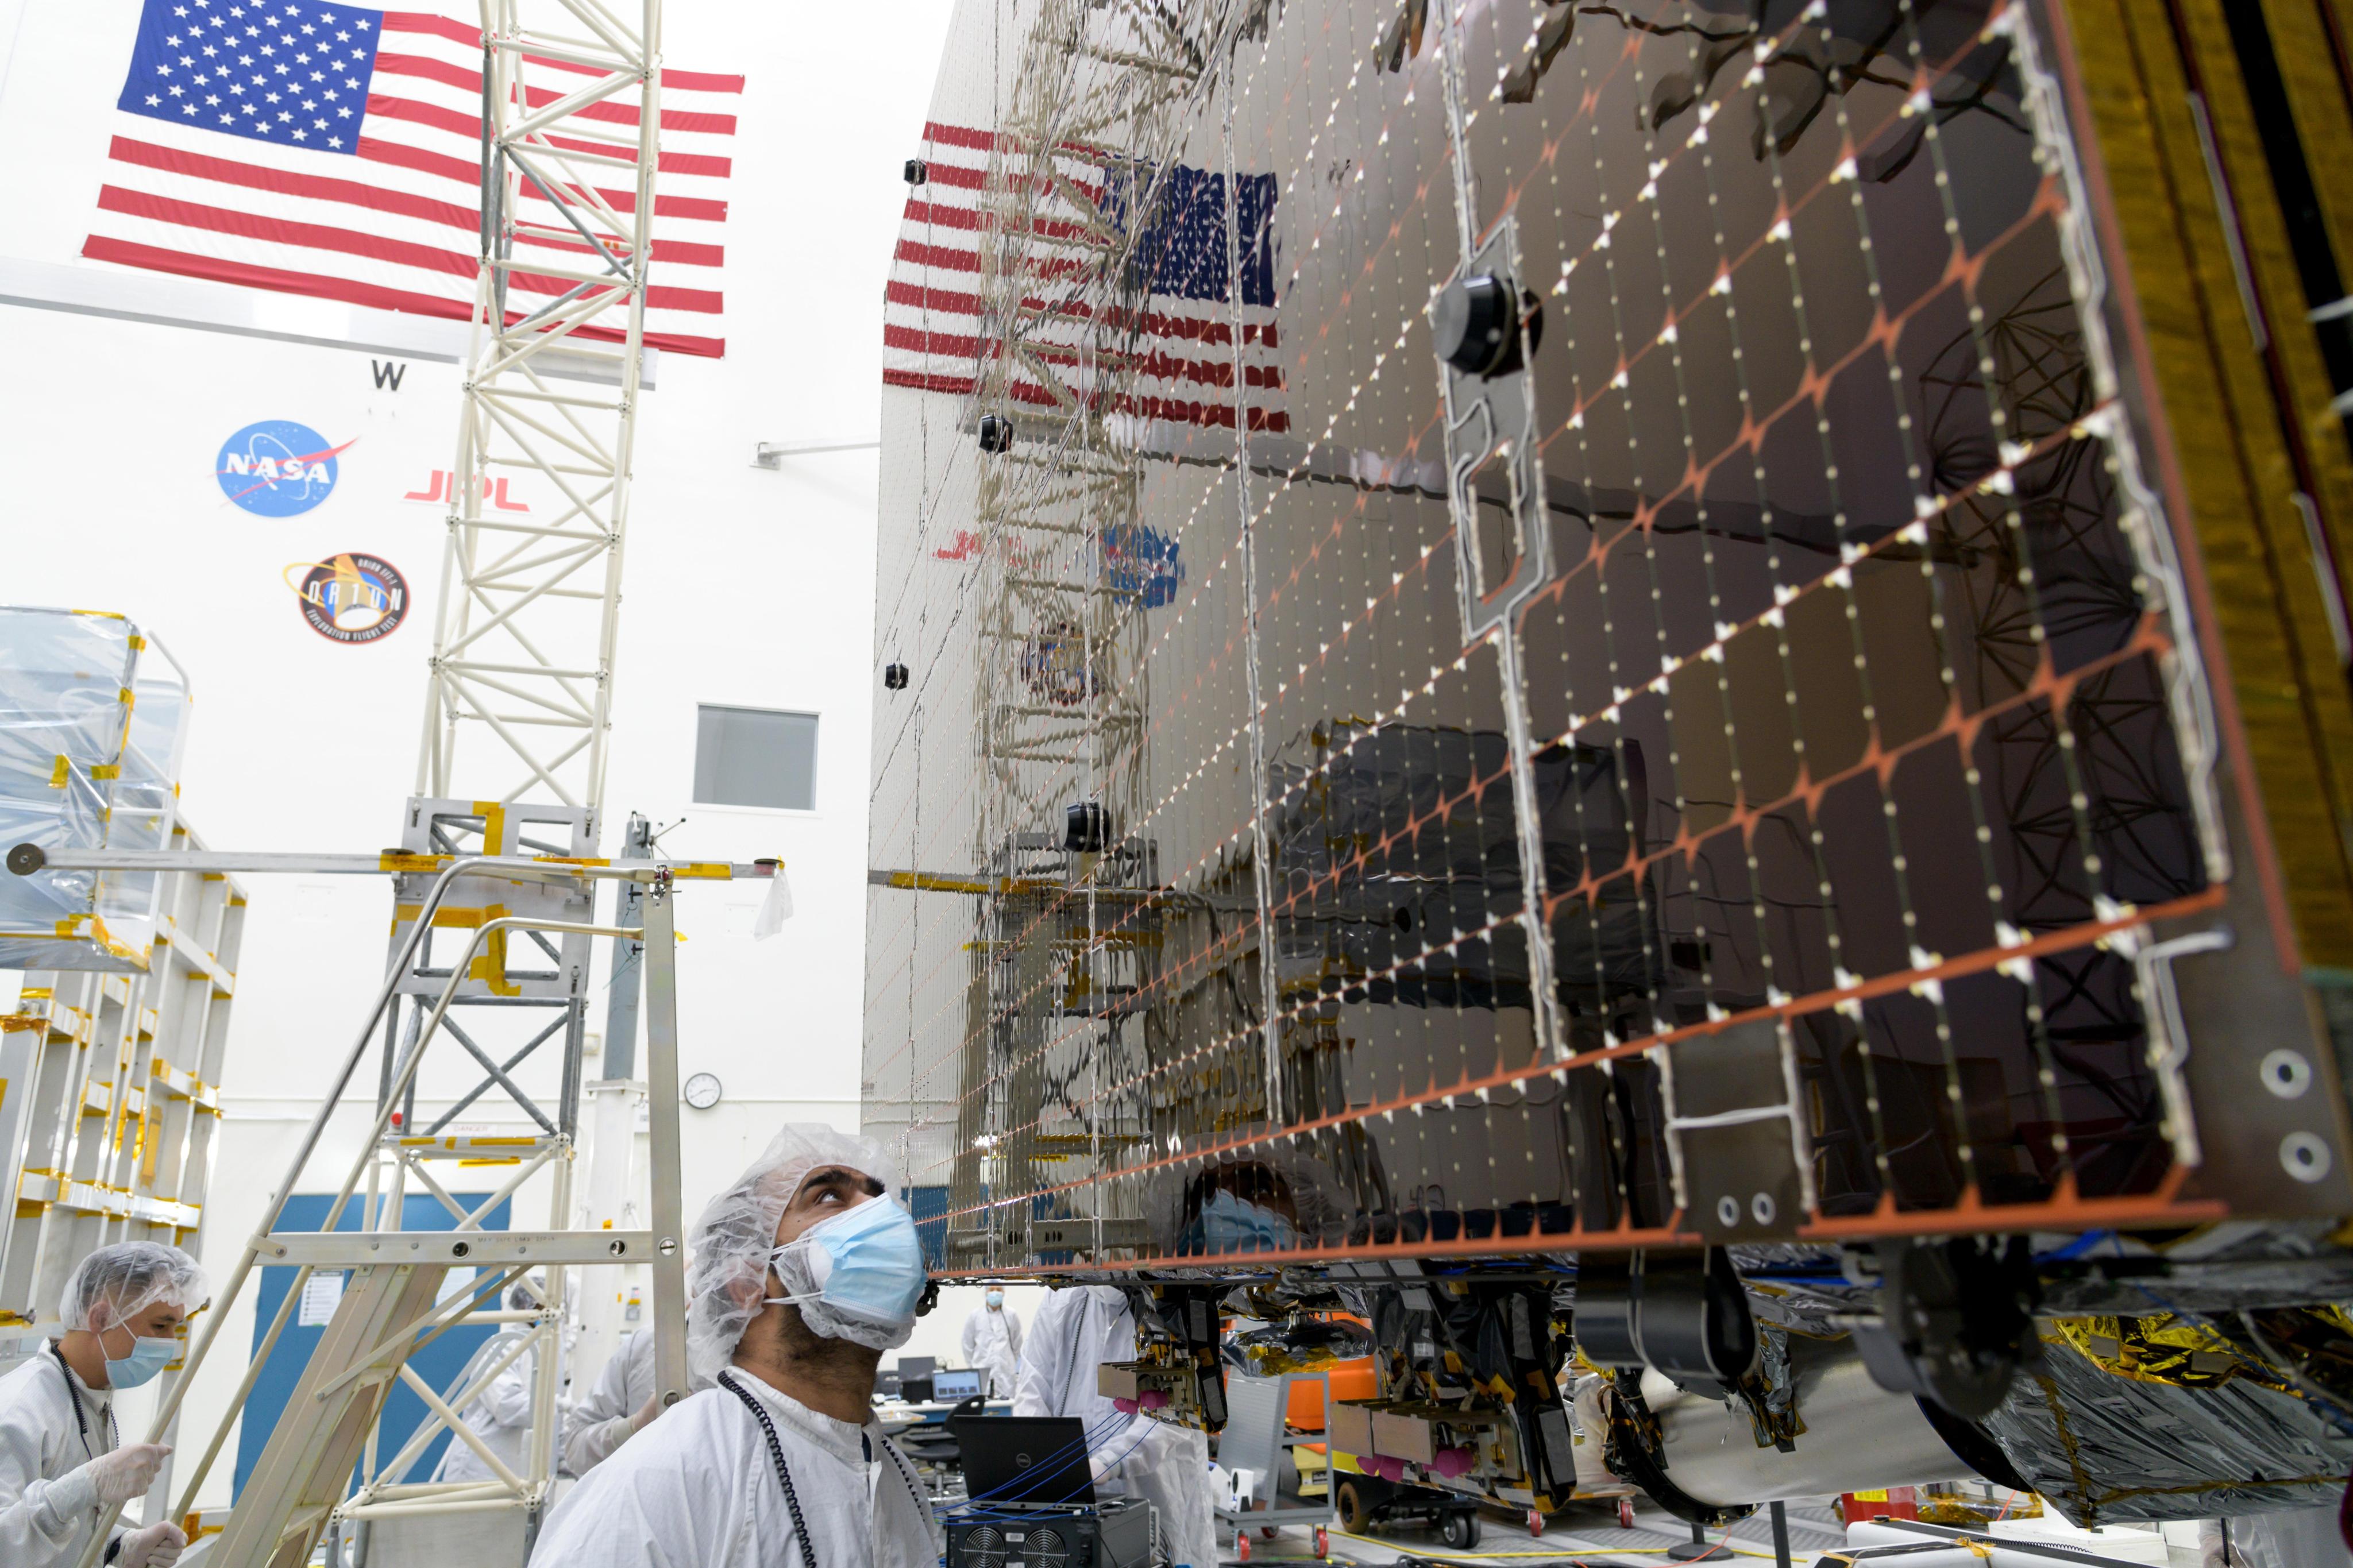 An engineer in white protective clothing, a head covering, and a blue face mask looks up at part of one of Psyche's solar panel.